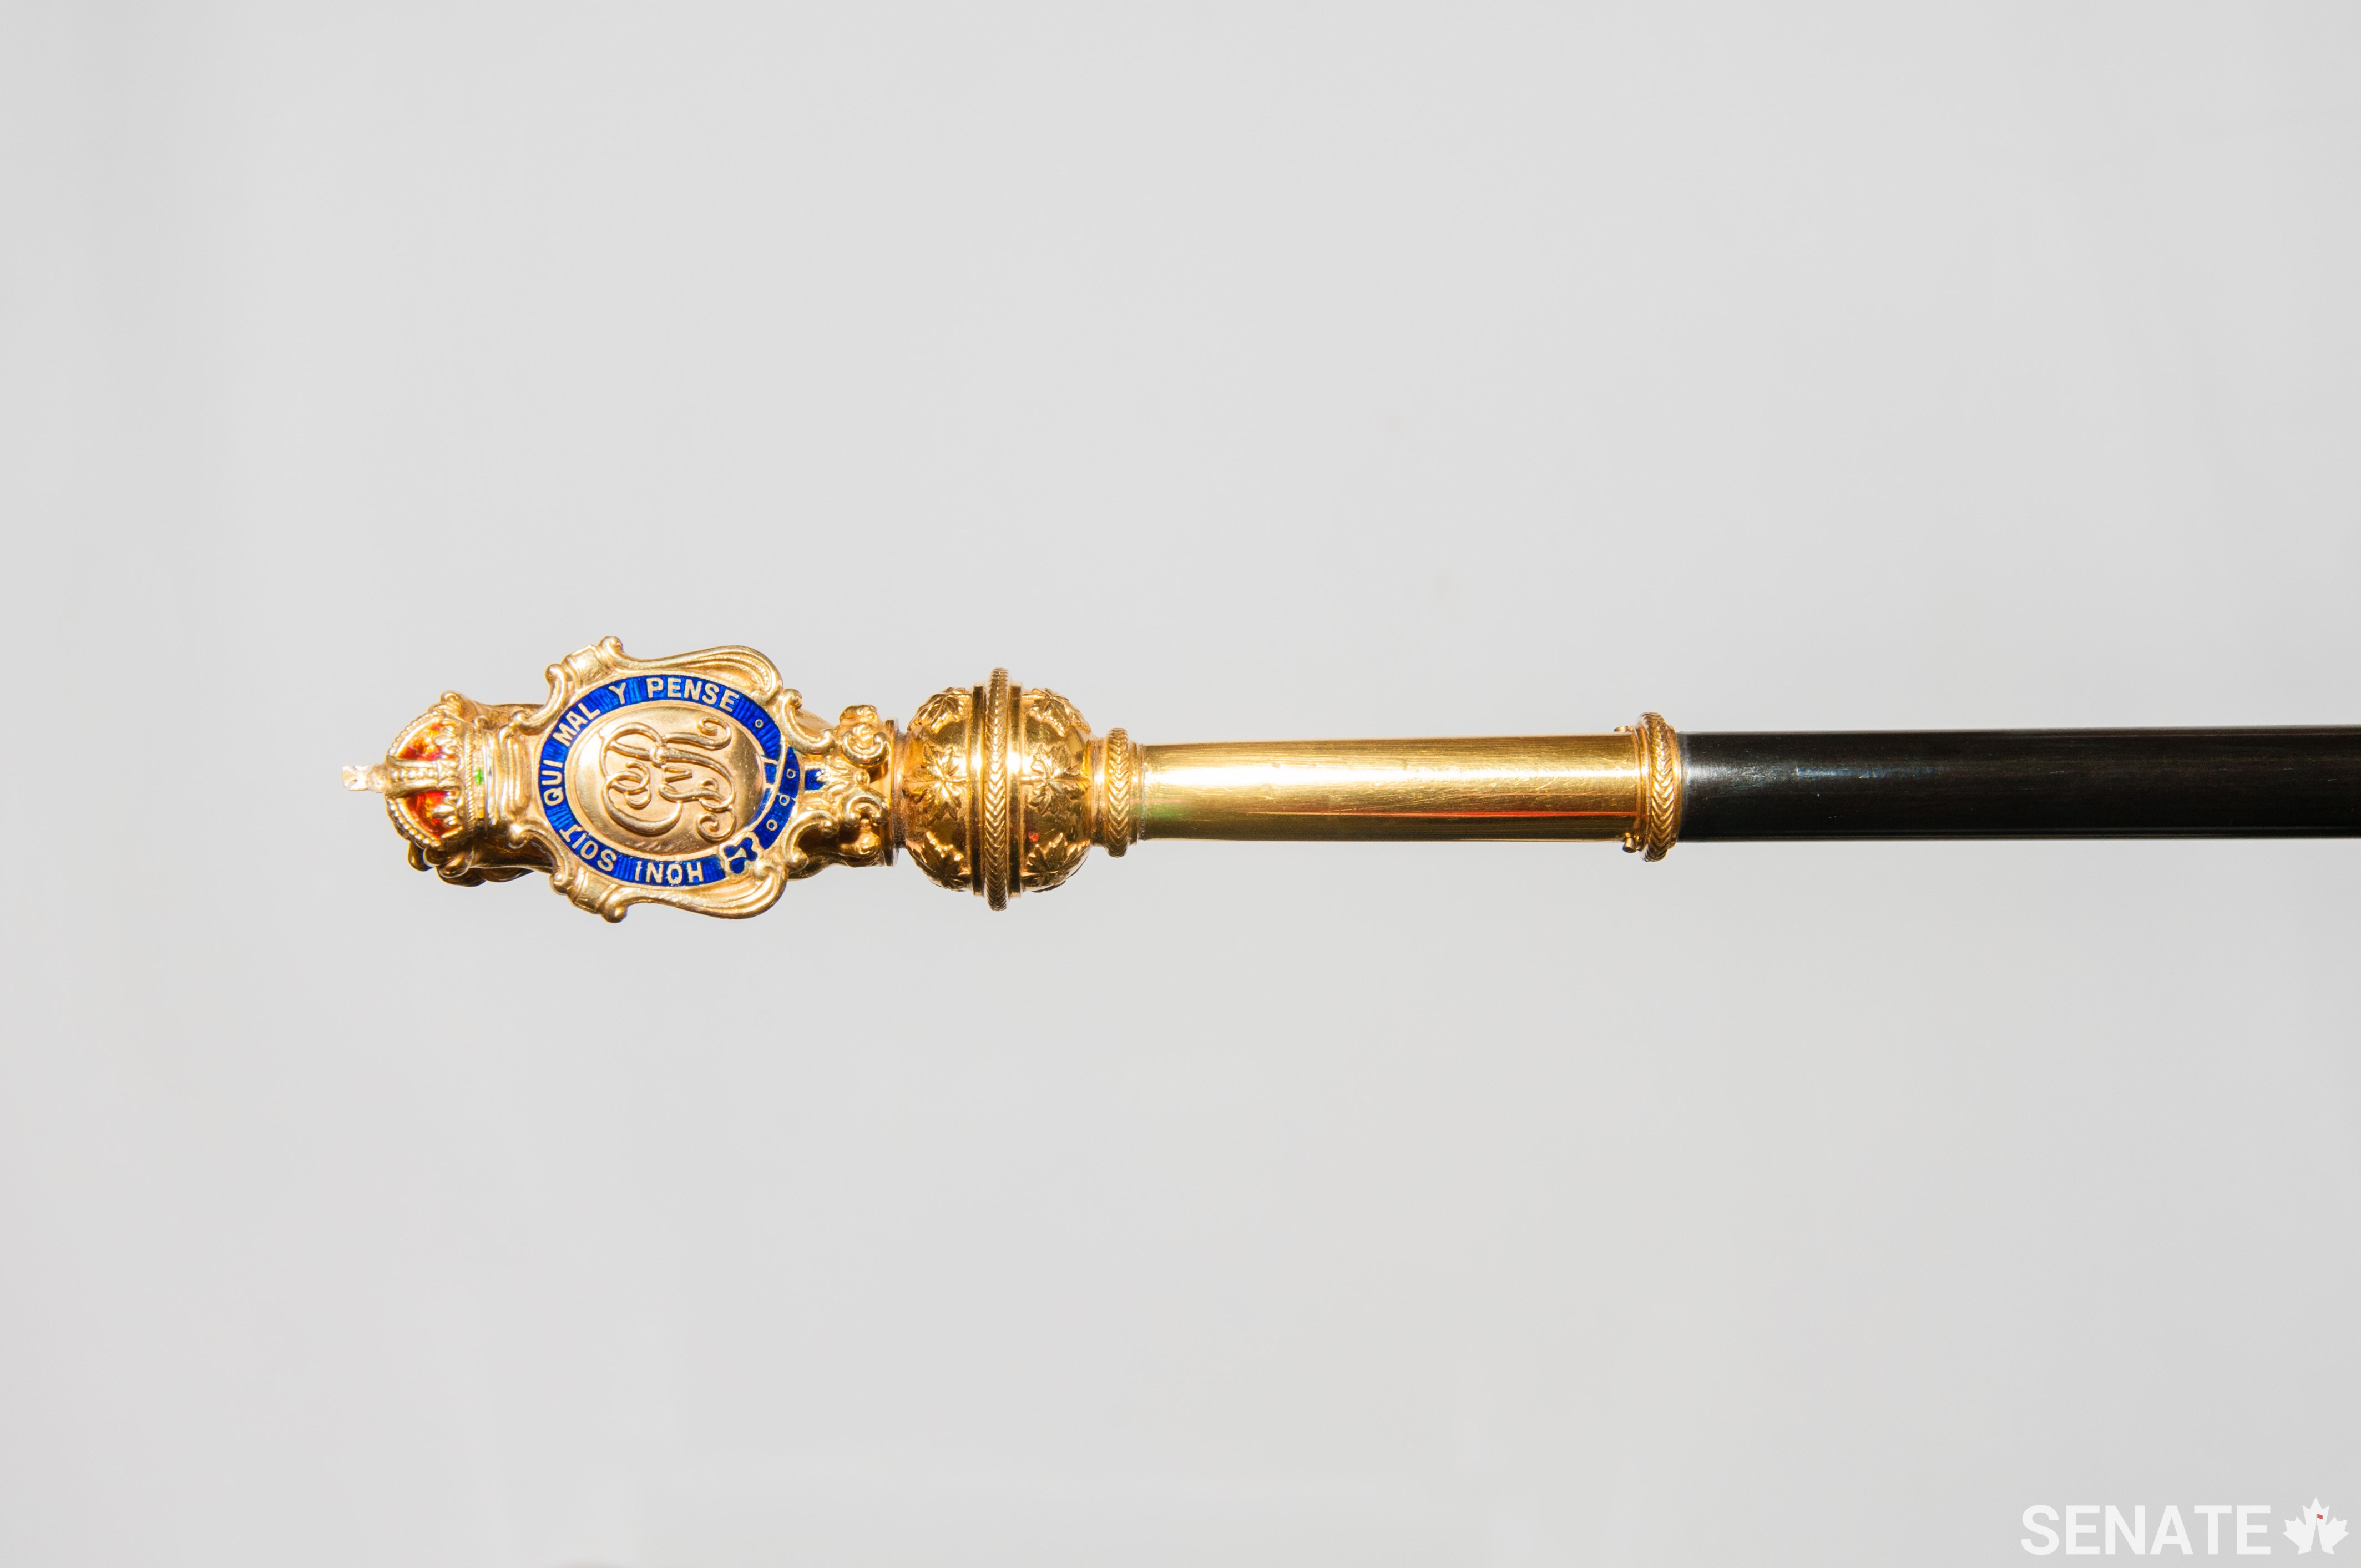 While the British Black Rod is decorated with the cypher of Edward VII, the Canadian Black Rod is decorated with the cypher of George V, who was king at the time of its design in 1916.